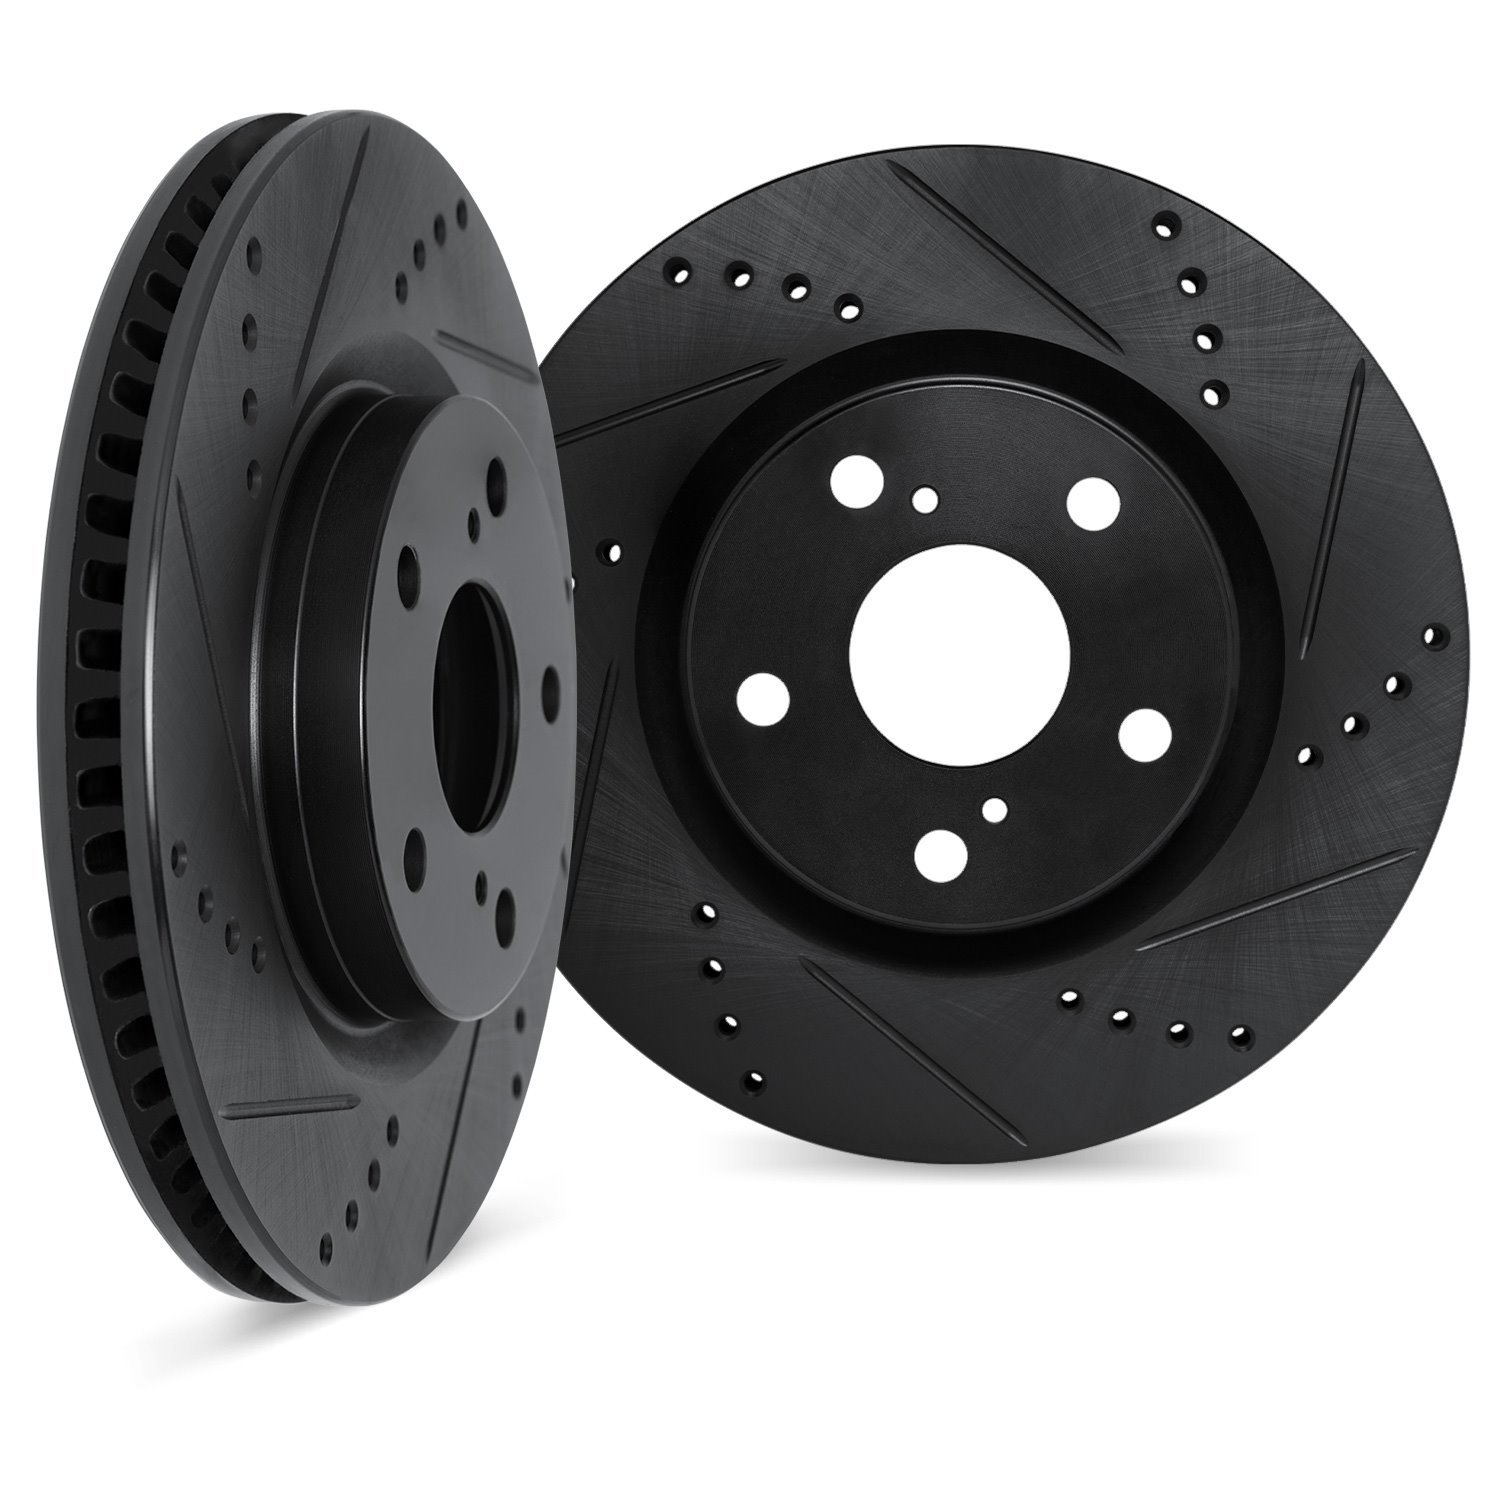 8002-68008 Drilled/Slotted Brake Rotors [Black], Fits Select Infiniti/Nissan, Position: Front